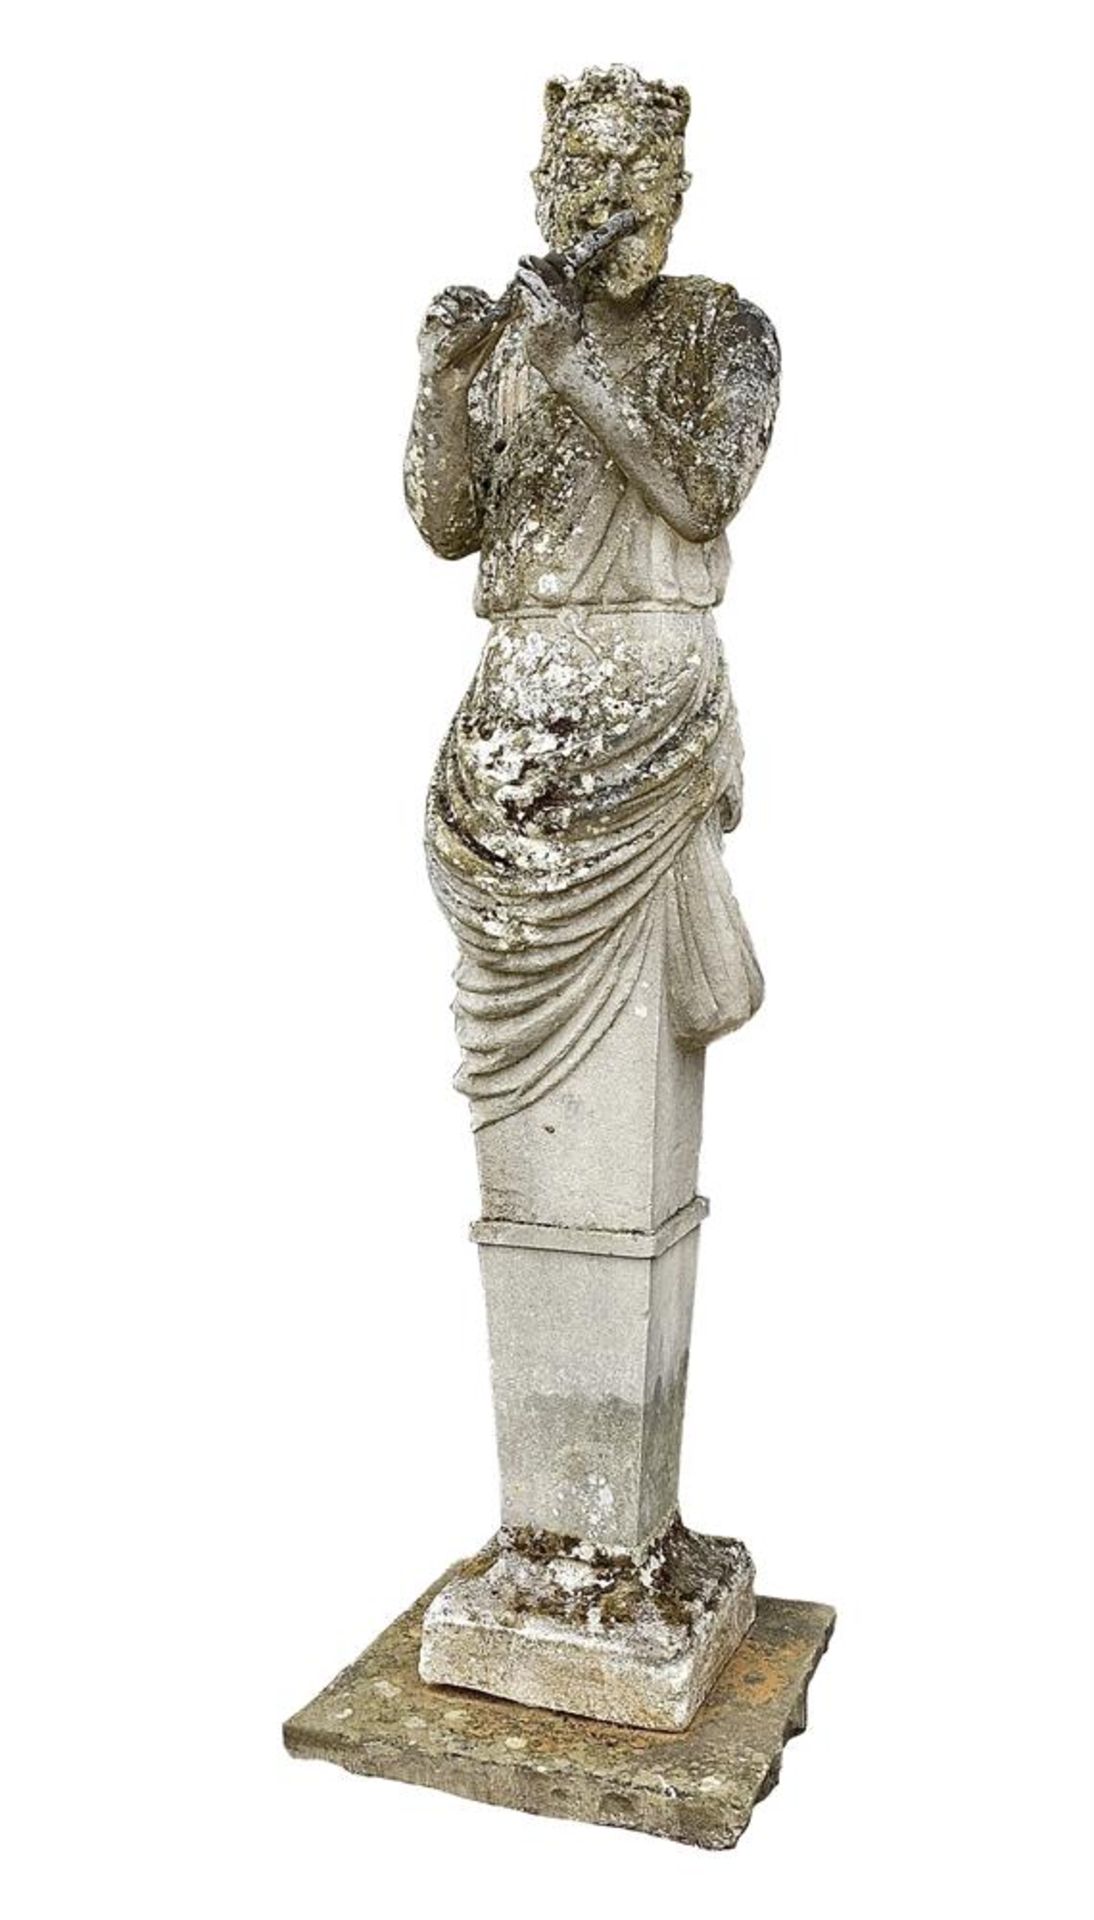 A CARVED PORTLAND STONE TERM STATUE OF PAN, LATE 19TH CENTURY